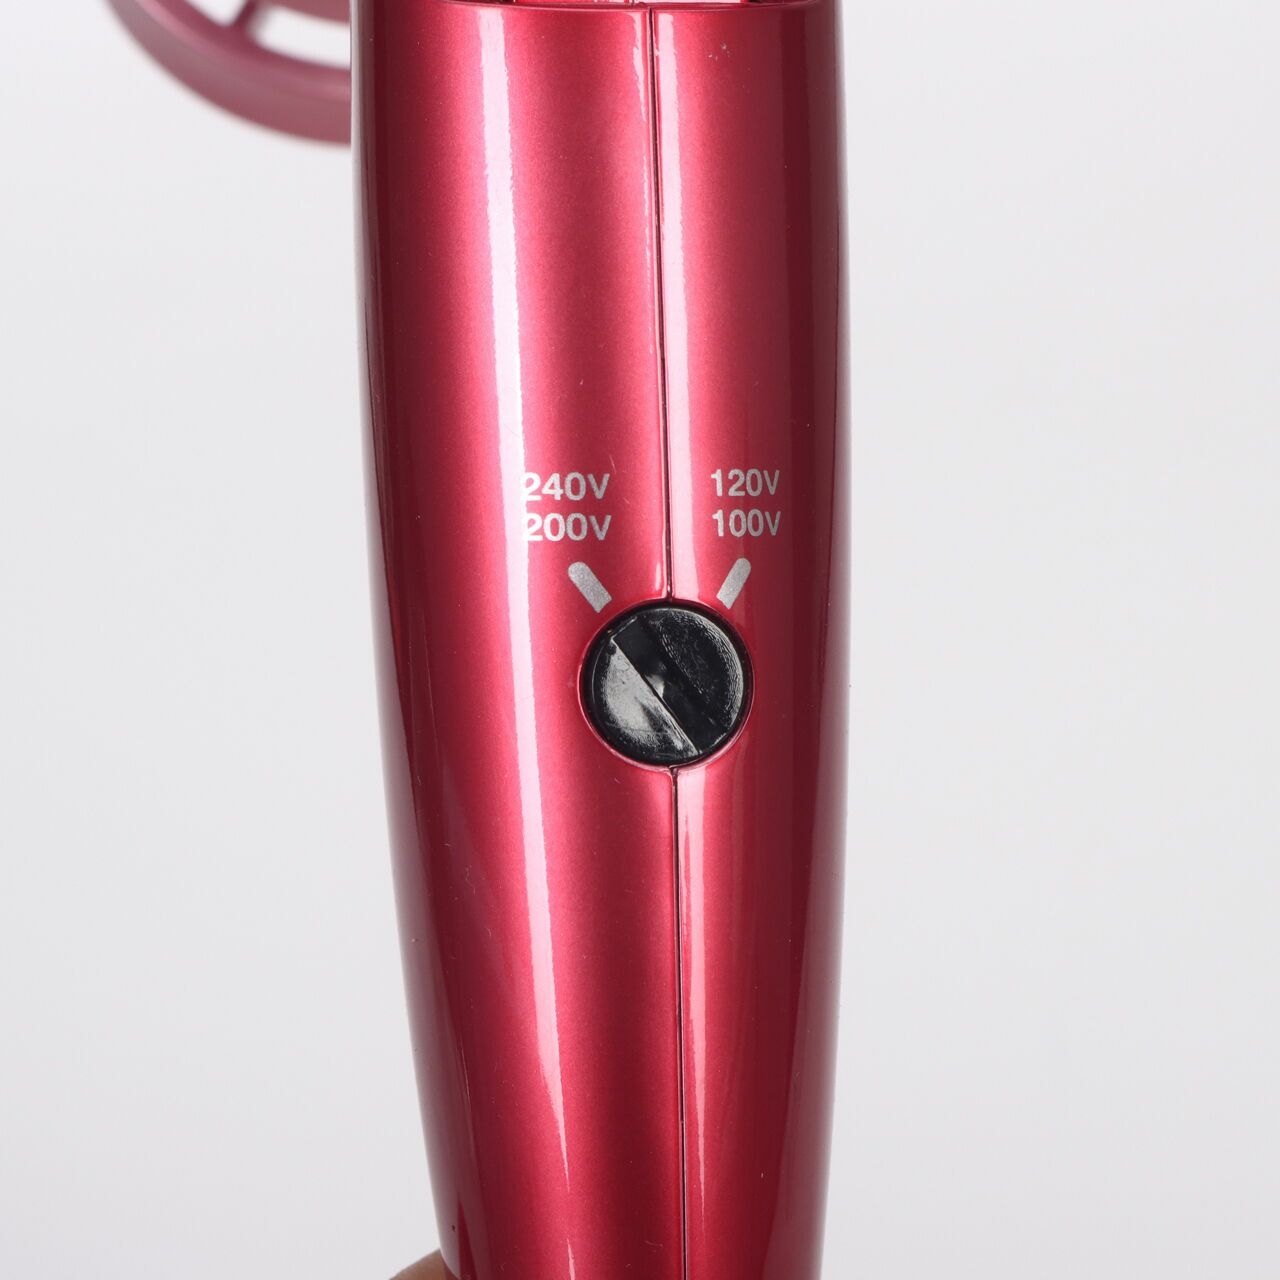 Nobby by Tescom Pink Collagen Ion Hair Dryer 